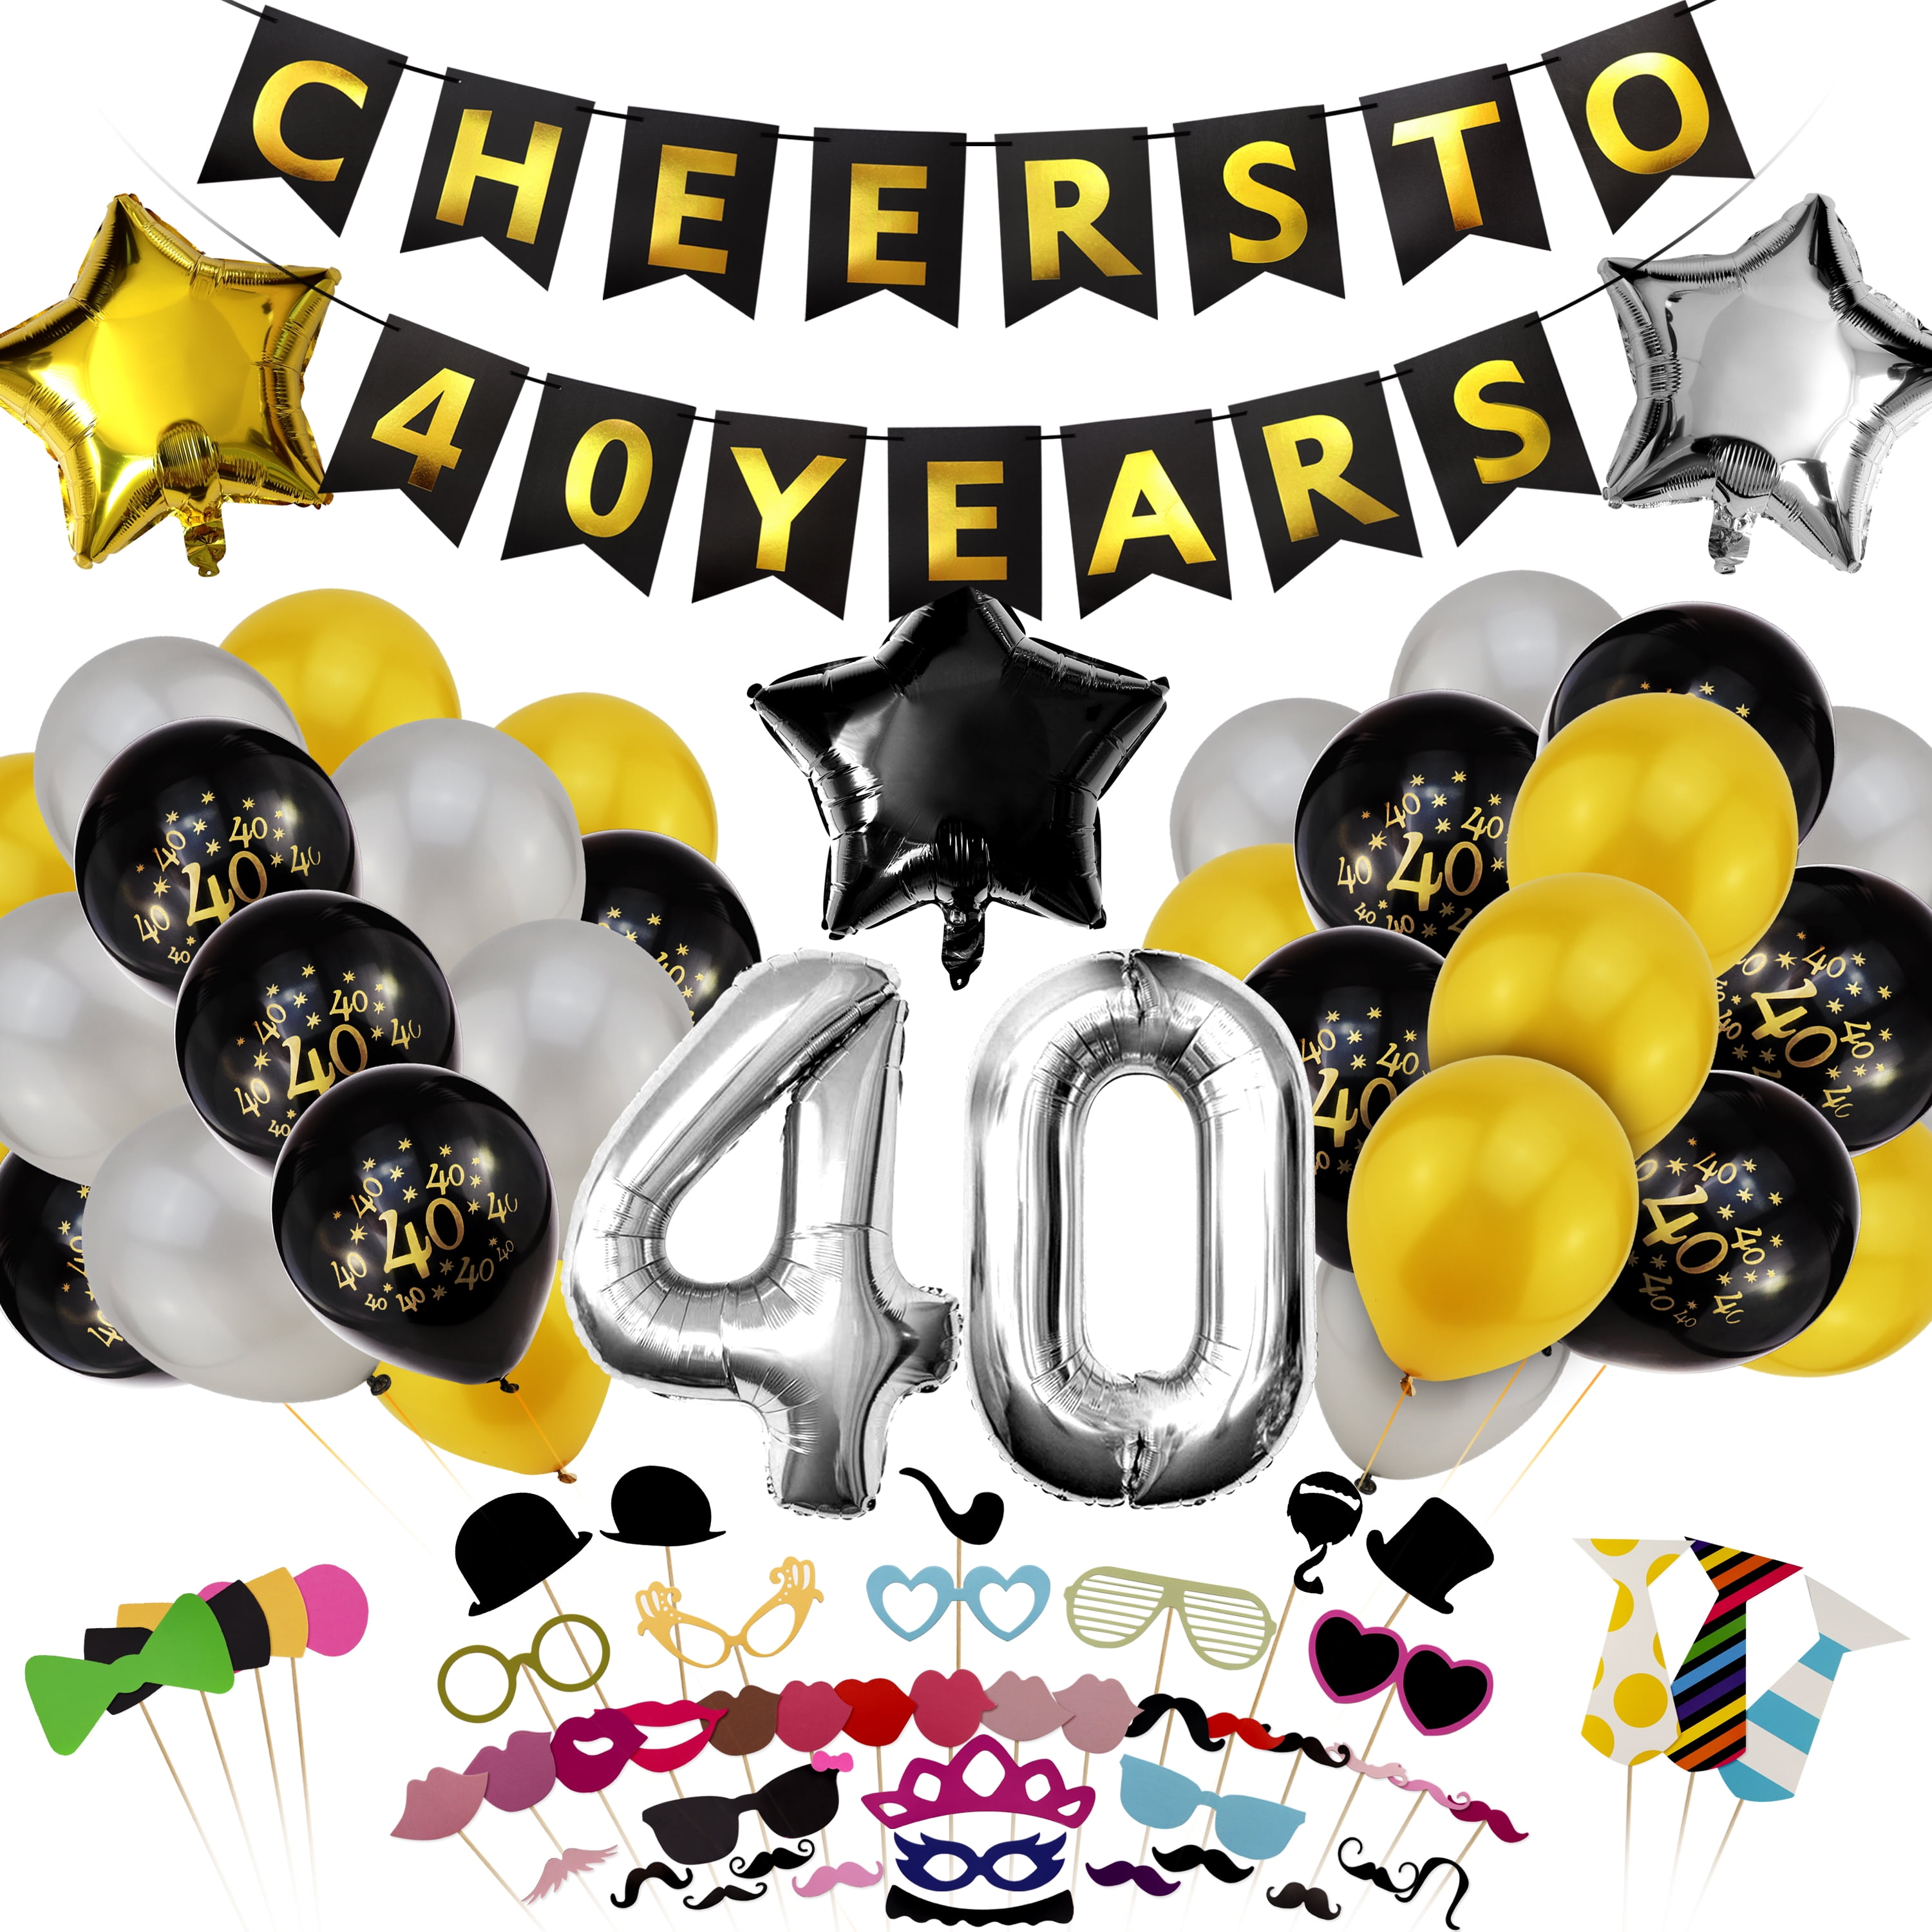 40th Birthday Party Decorations Happy 40th Birthday Banner for 40 Years Old Birthday Party Supplies,Party Decorations for 40th Birthday（Black Gold Glitter）